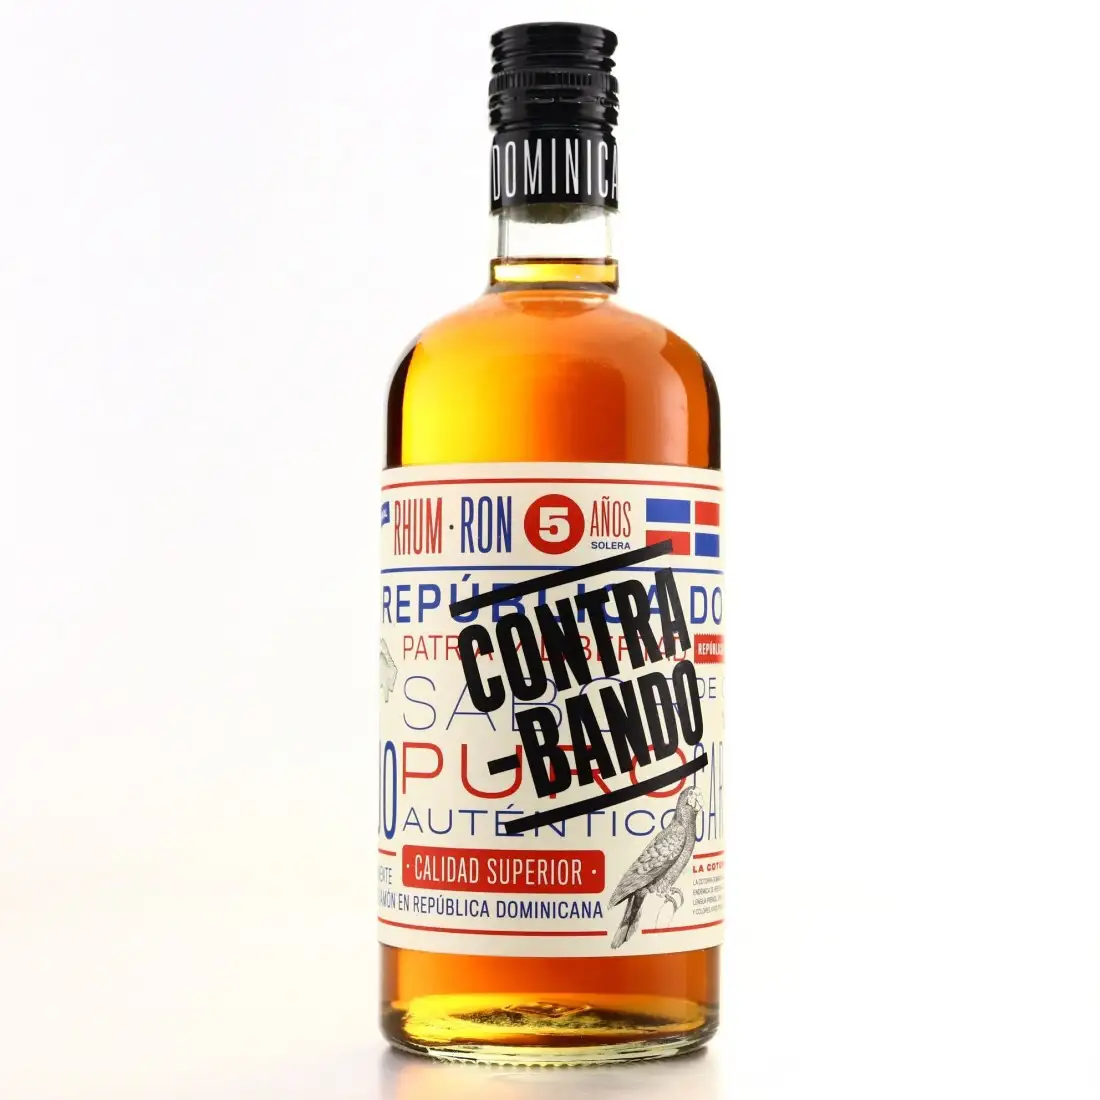 Image of the front of the bottle of the rum Contrabando